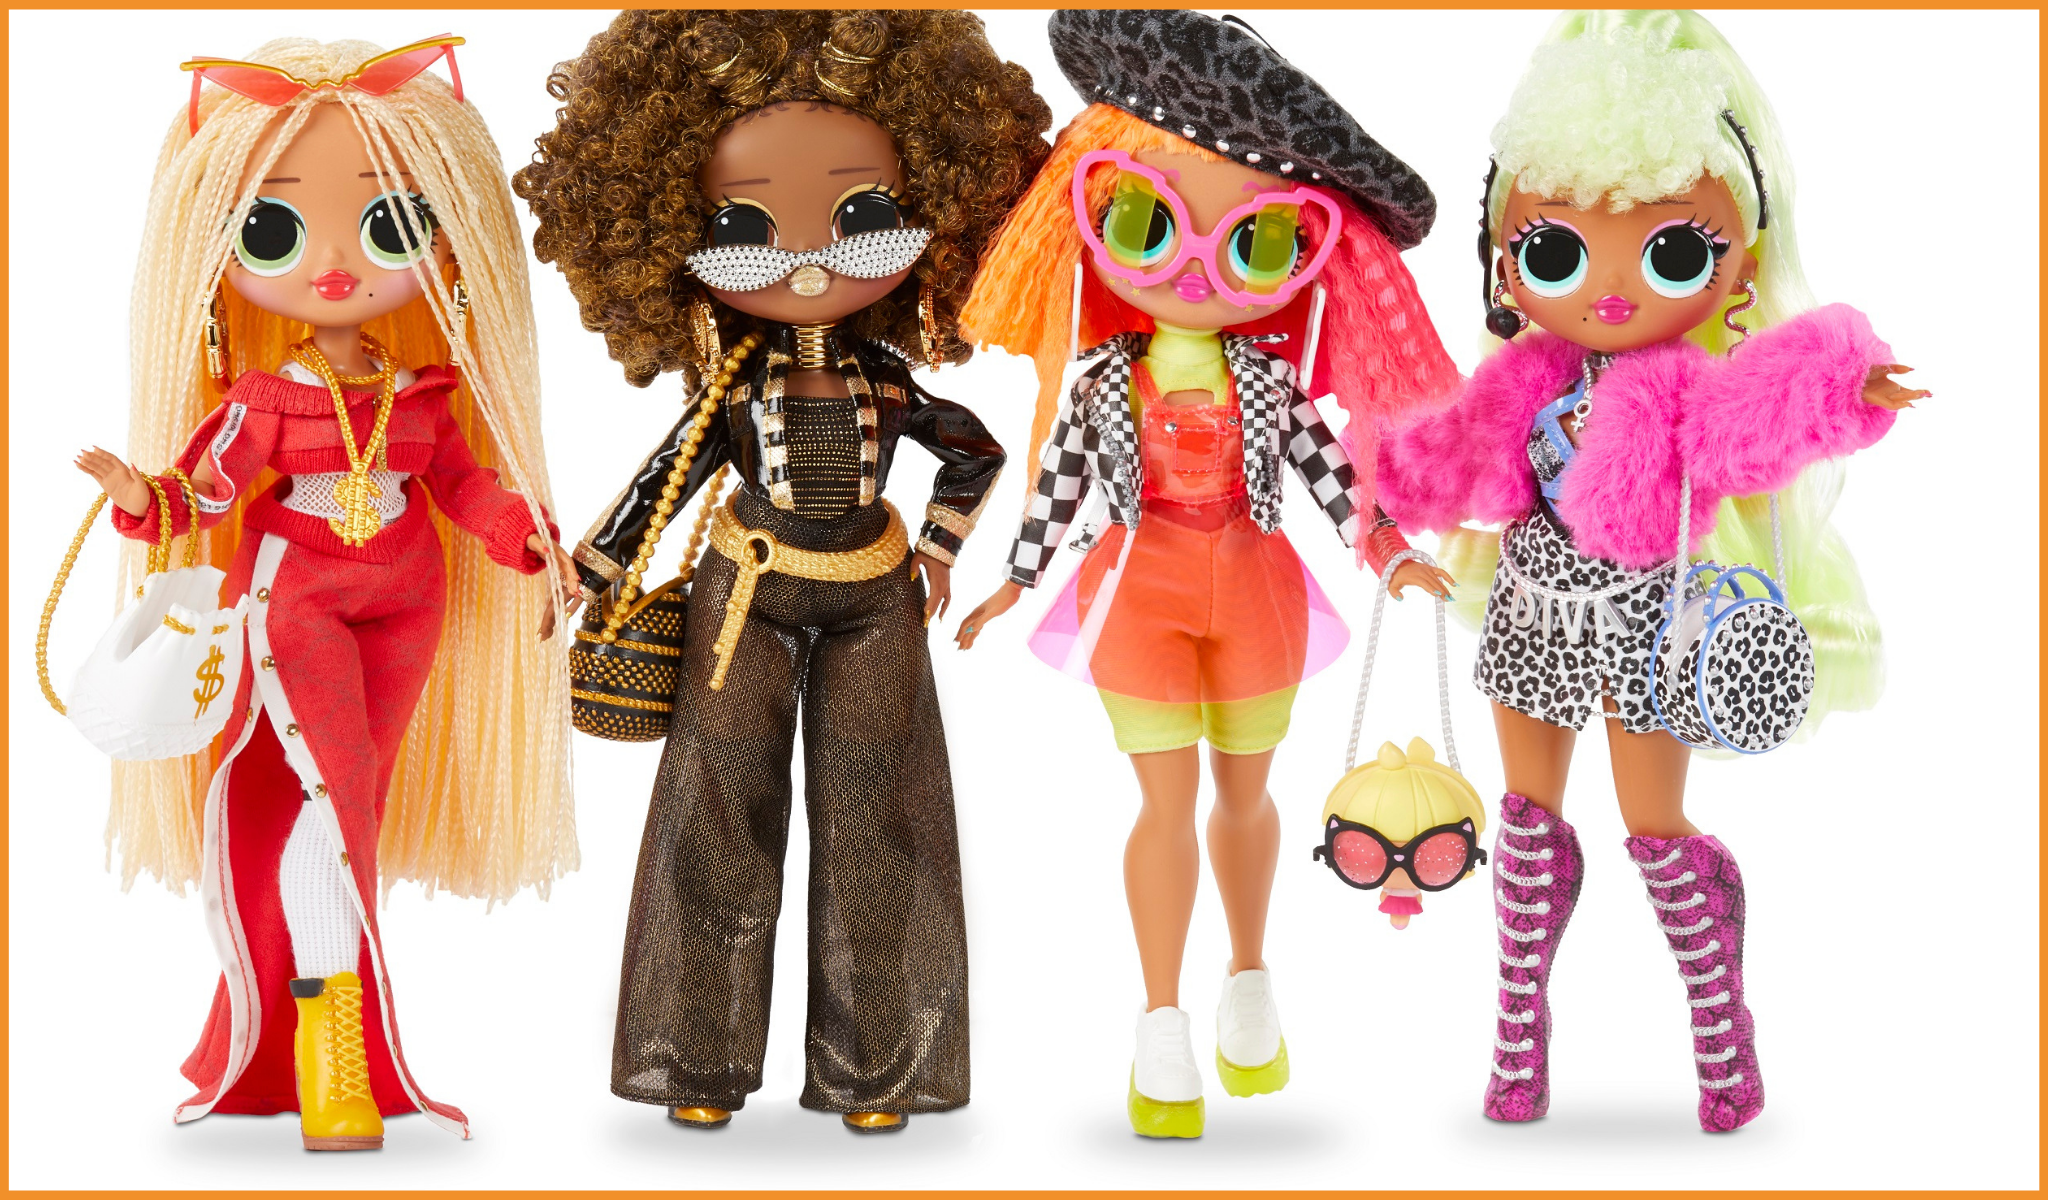 L.O.L. Surprise dolls - Let's find out who they are!